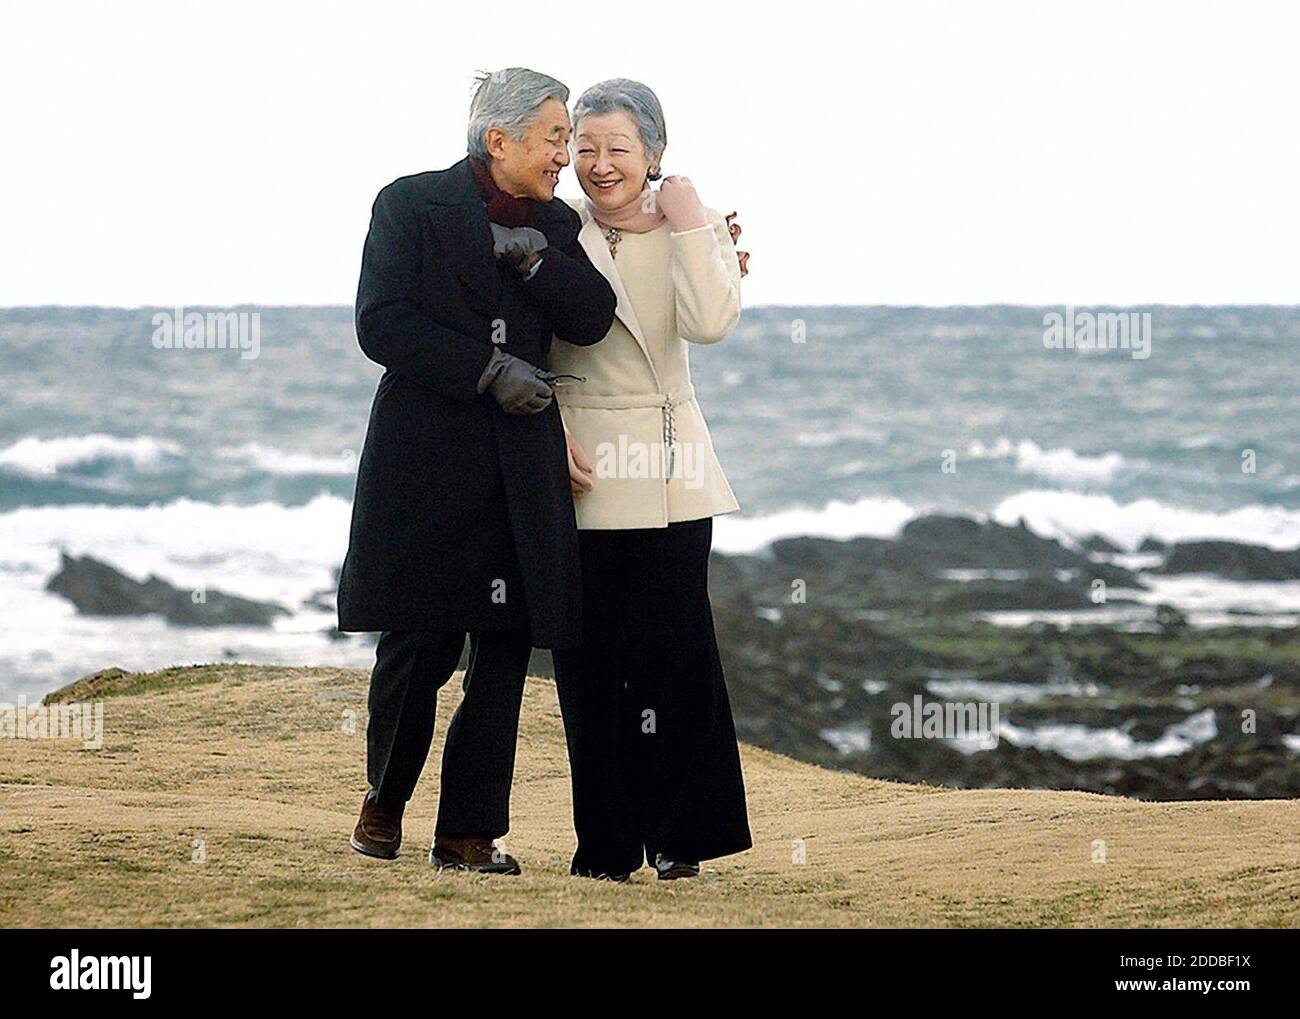 NO FILM, NO VIDEO, NO TV, NO DOCUMENTARY - The Emperor Akihito of Japan and Empress Michiko walk along the seashore in Hayamamachi, Kanagawa Prefecture, Wednesday, January 3, 2005, after arriving at a nearby Imperial villa earlier in the morning. Photo by Yomiuri Shimbun/KRT/ABACA. Stock Photo